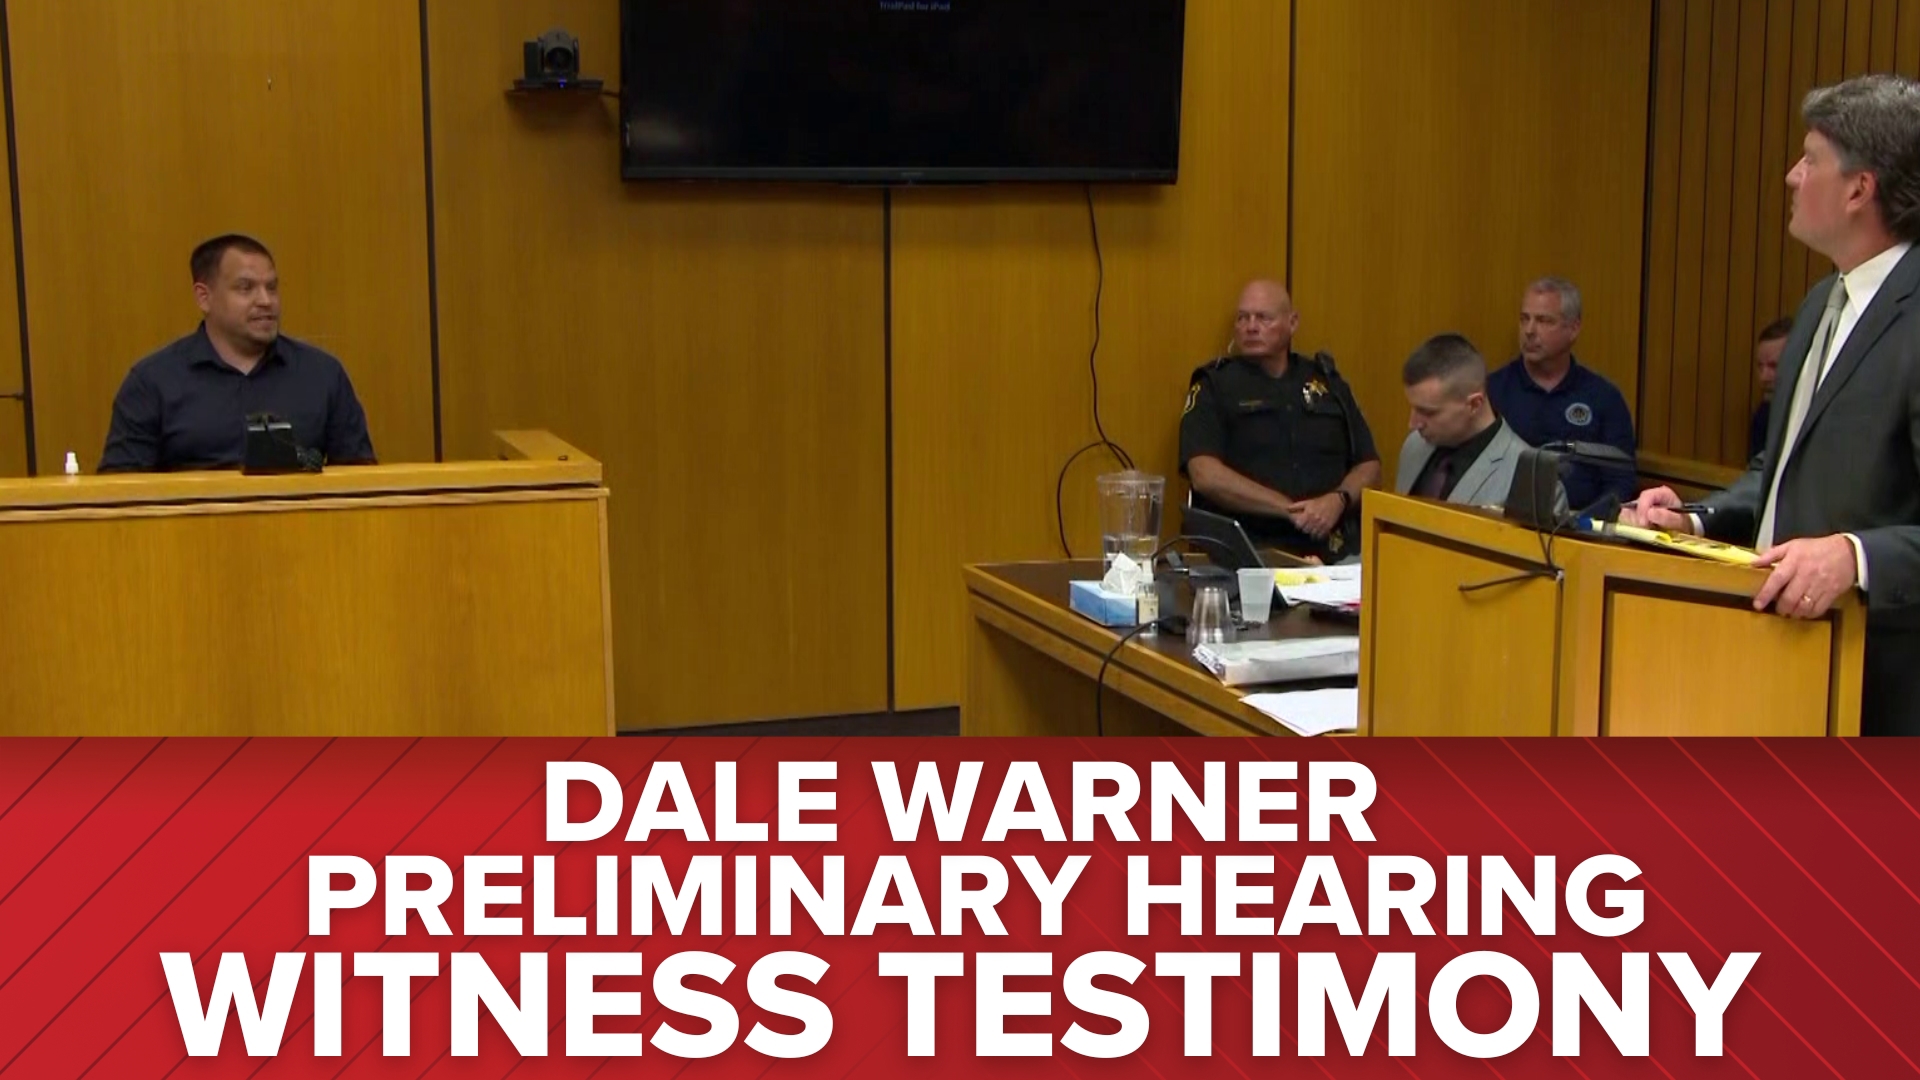 Wagner said he changed passwords to the security system on Dale's request the day after Dee went missing, but did not copy info from her phone as Dale requested.